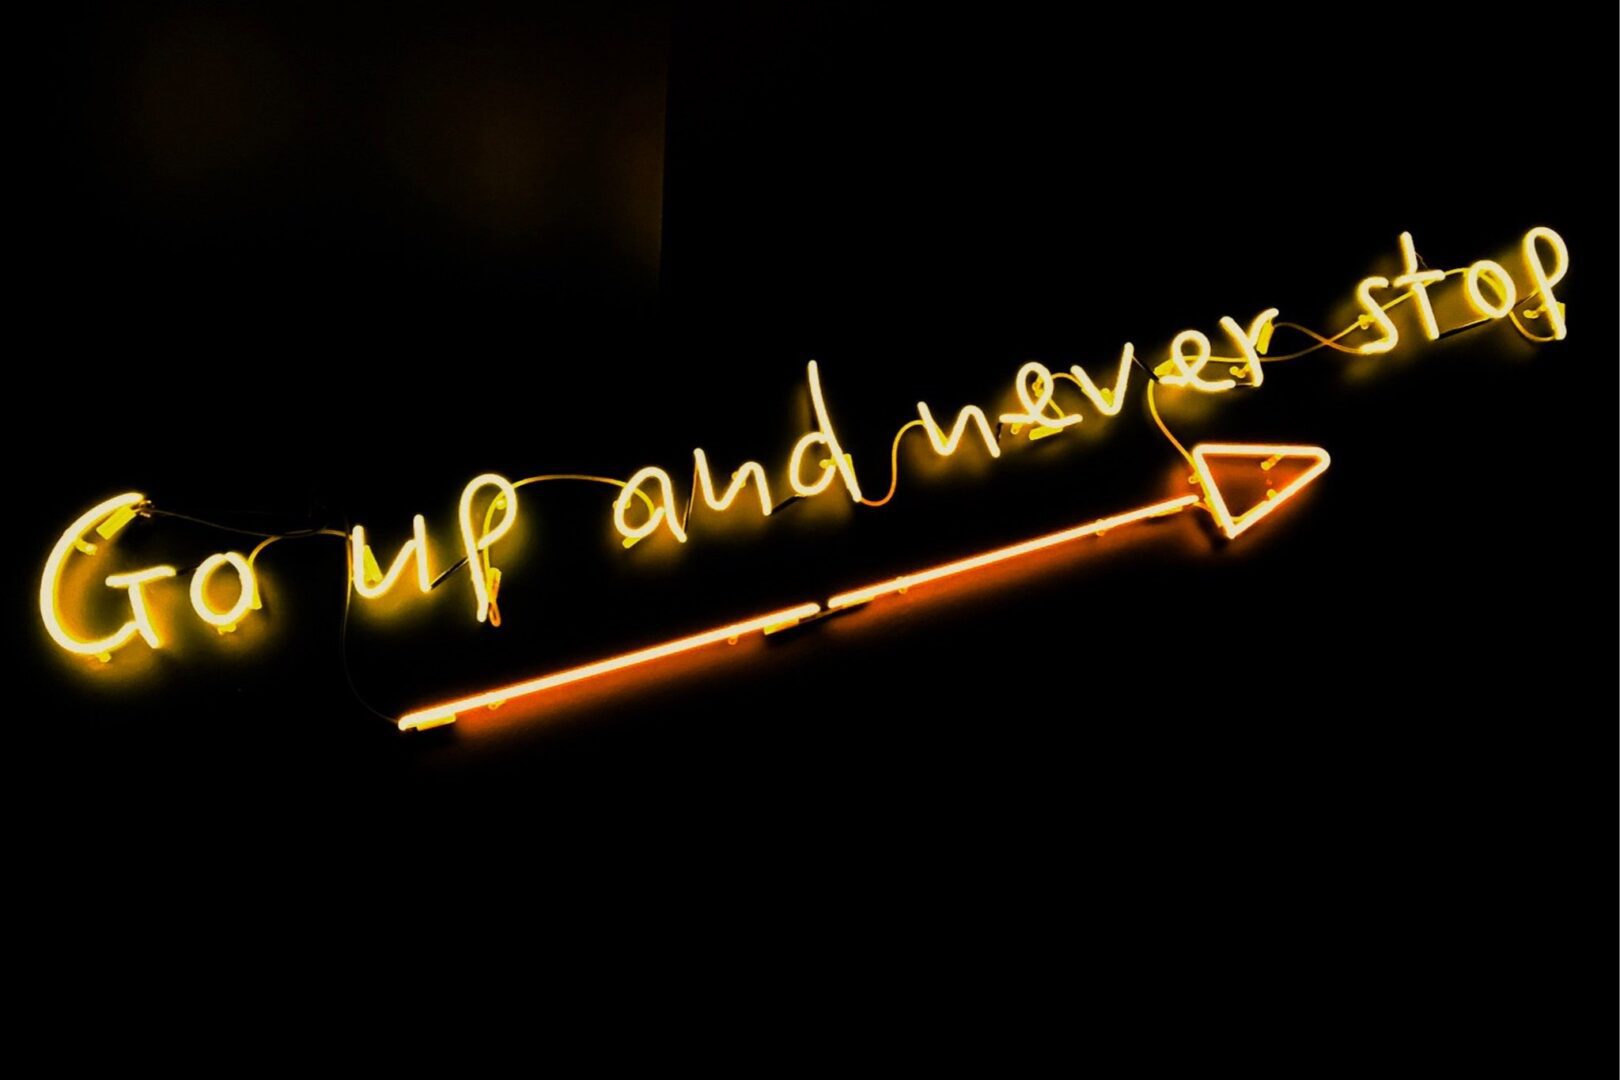 A neon sign that says go up and never stop.